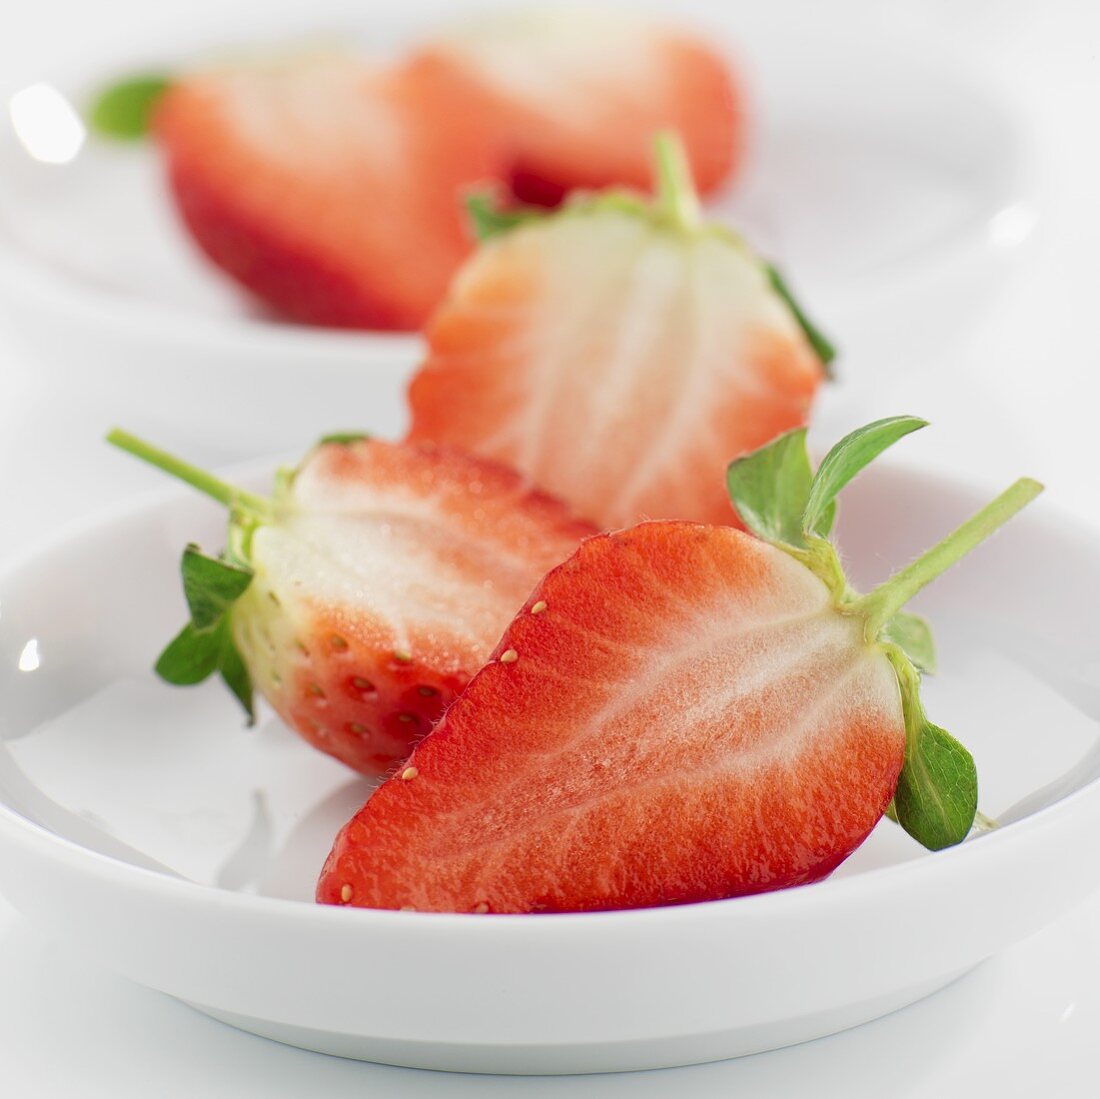 Halved strawberries in small white dishes